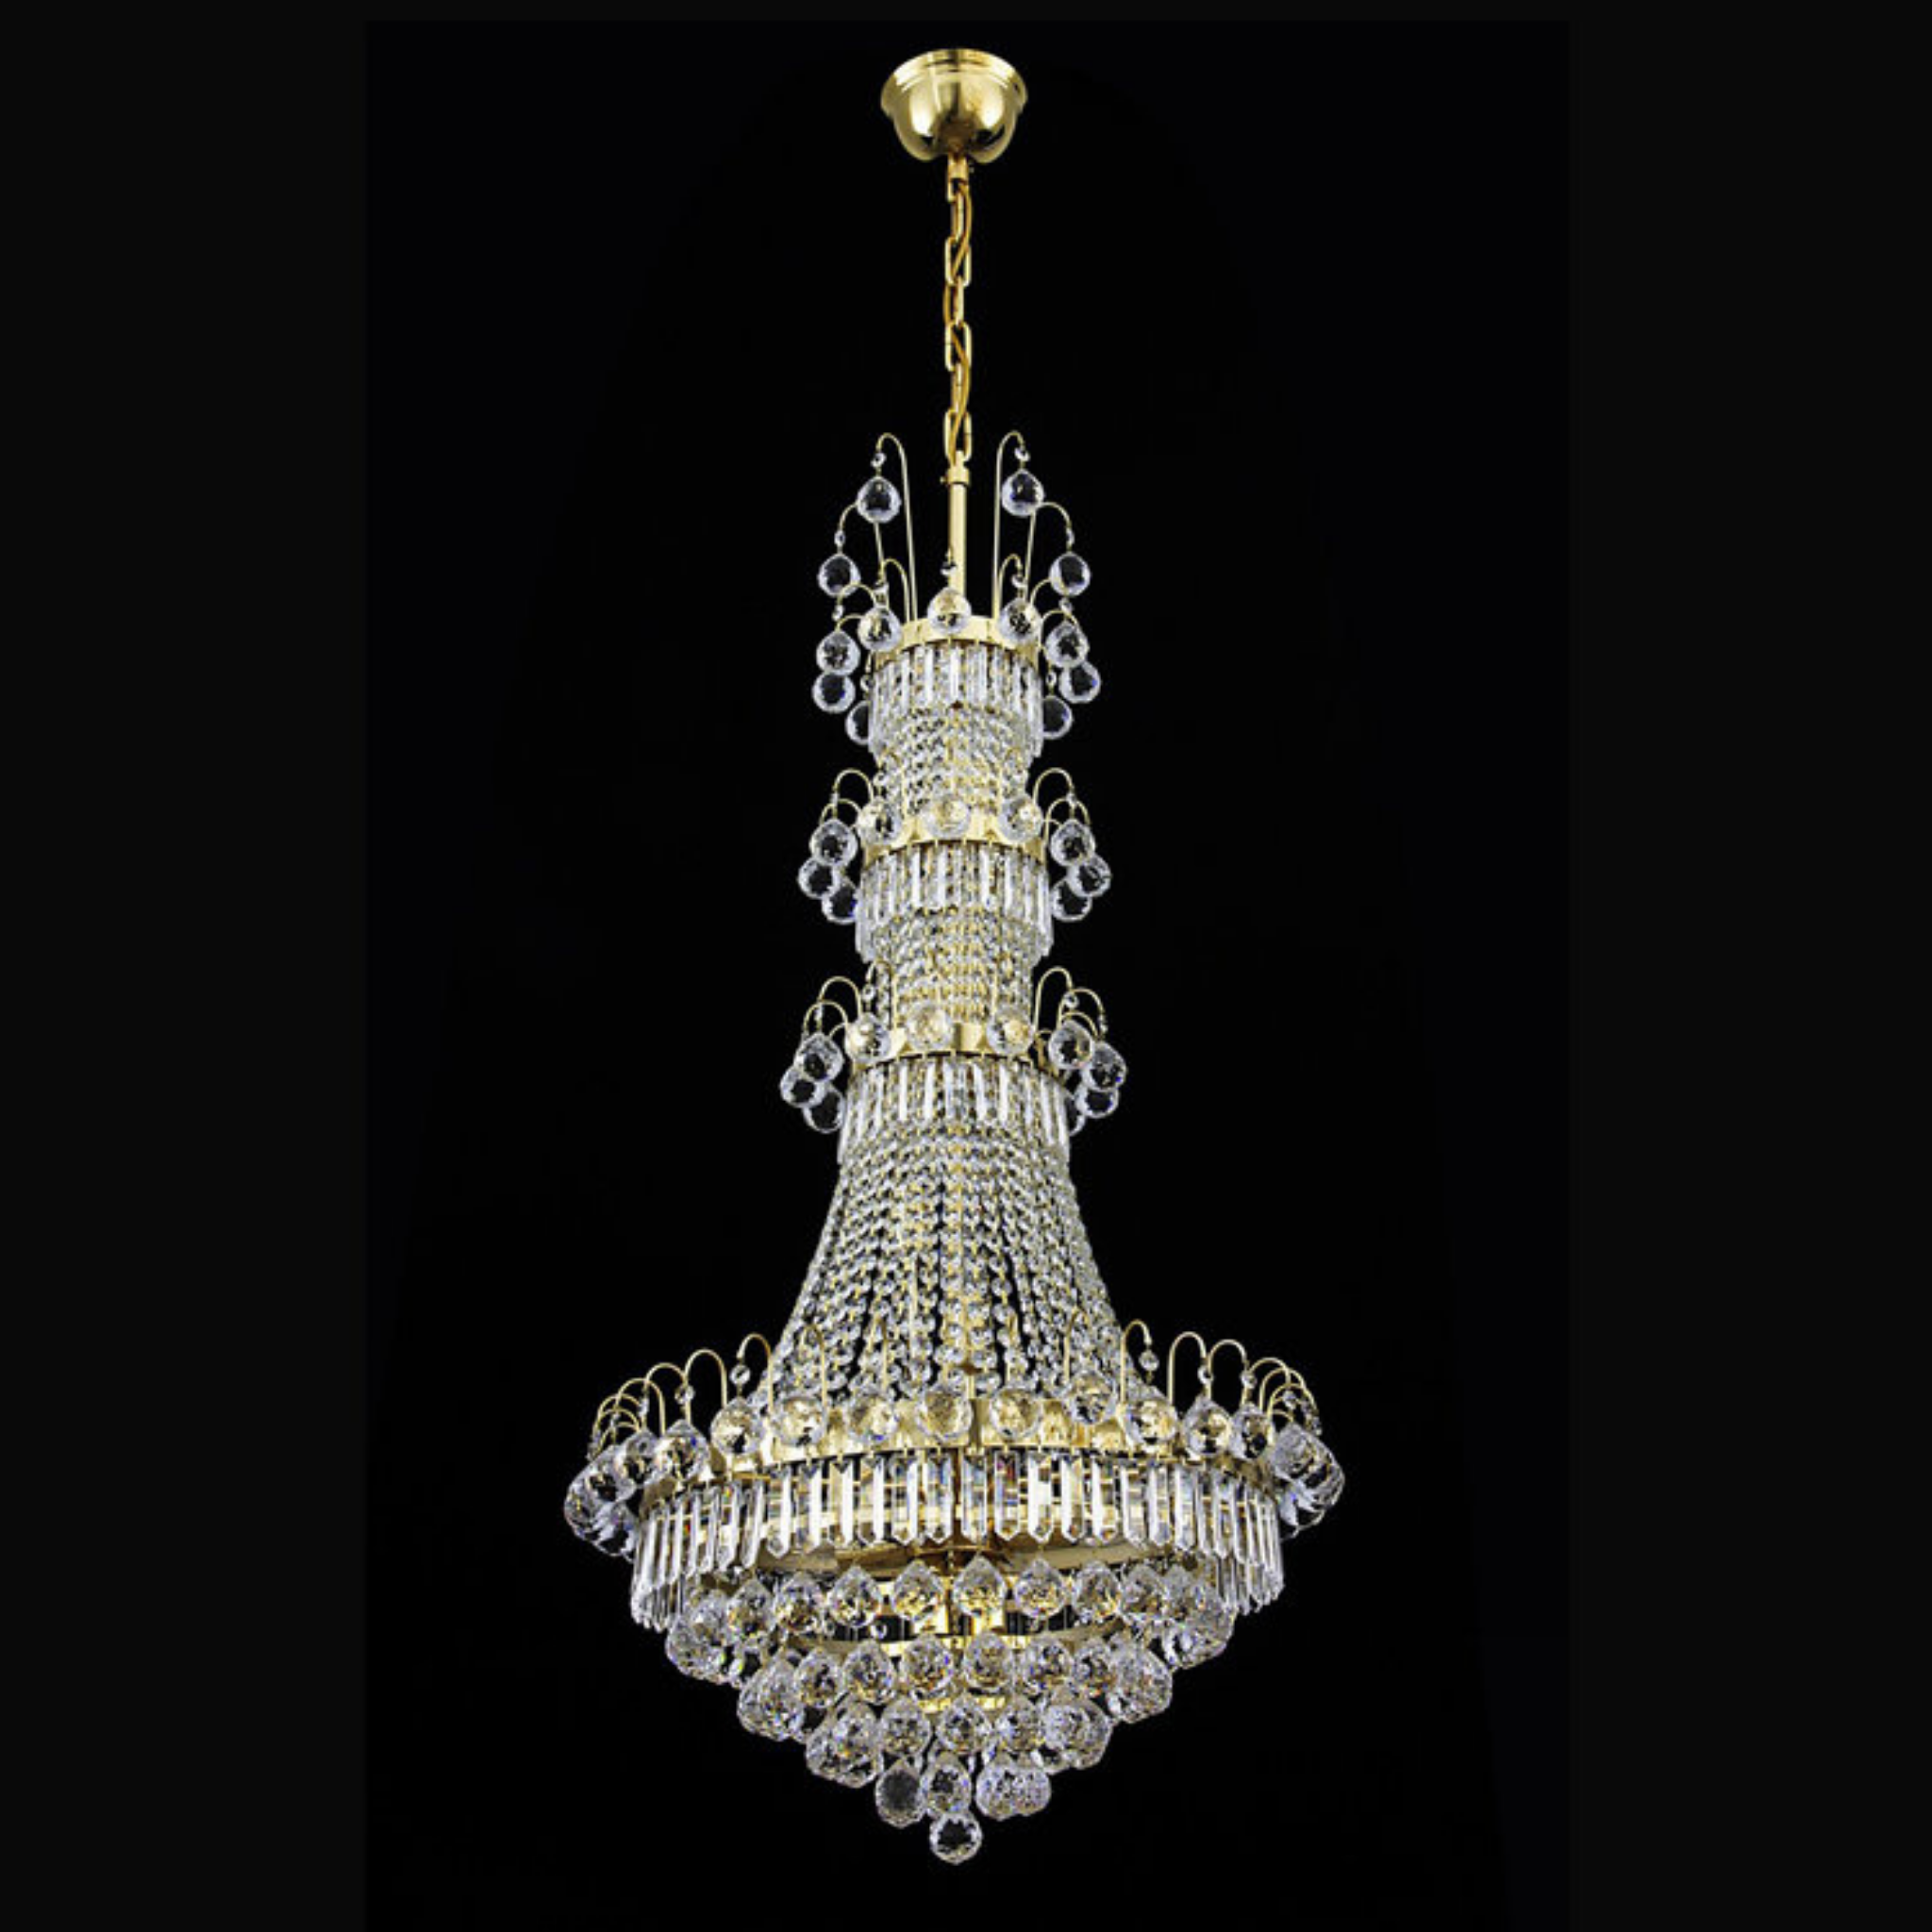 Orion 9 Crystal Glass Chandelier - Wranovsky - Luxury Lighting Boutique